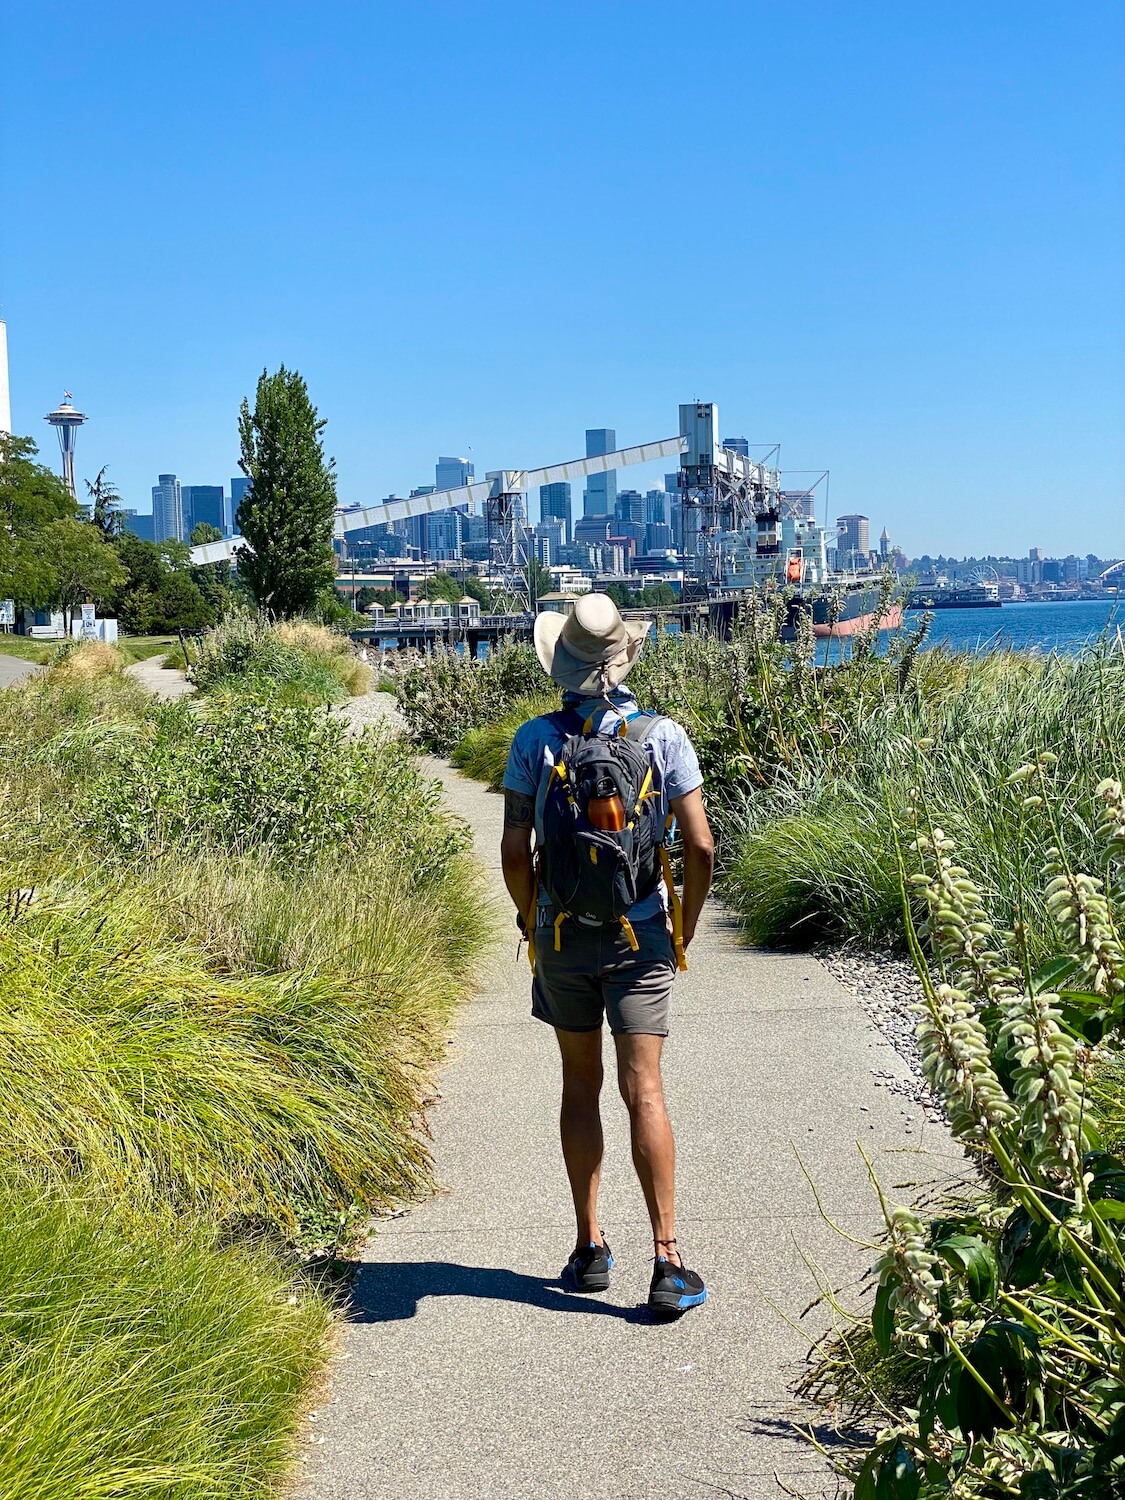 A hiker walks along the Elliott Bay Trail in Seattle. This Summer scene depicts fun things to do along the waterfront. The hiker is surrounded by seagrasses of various green colors while the skyline of industrial Seattle and the Space Needle rise up in the background.